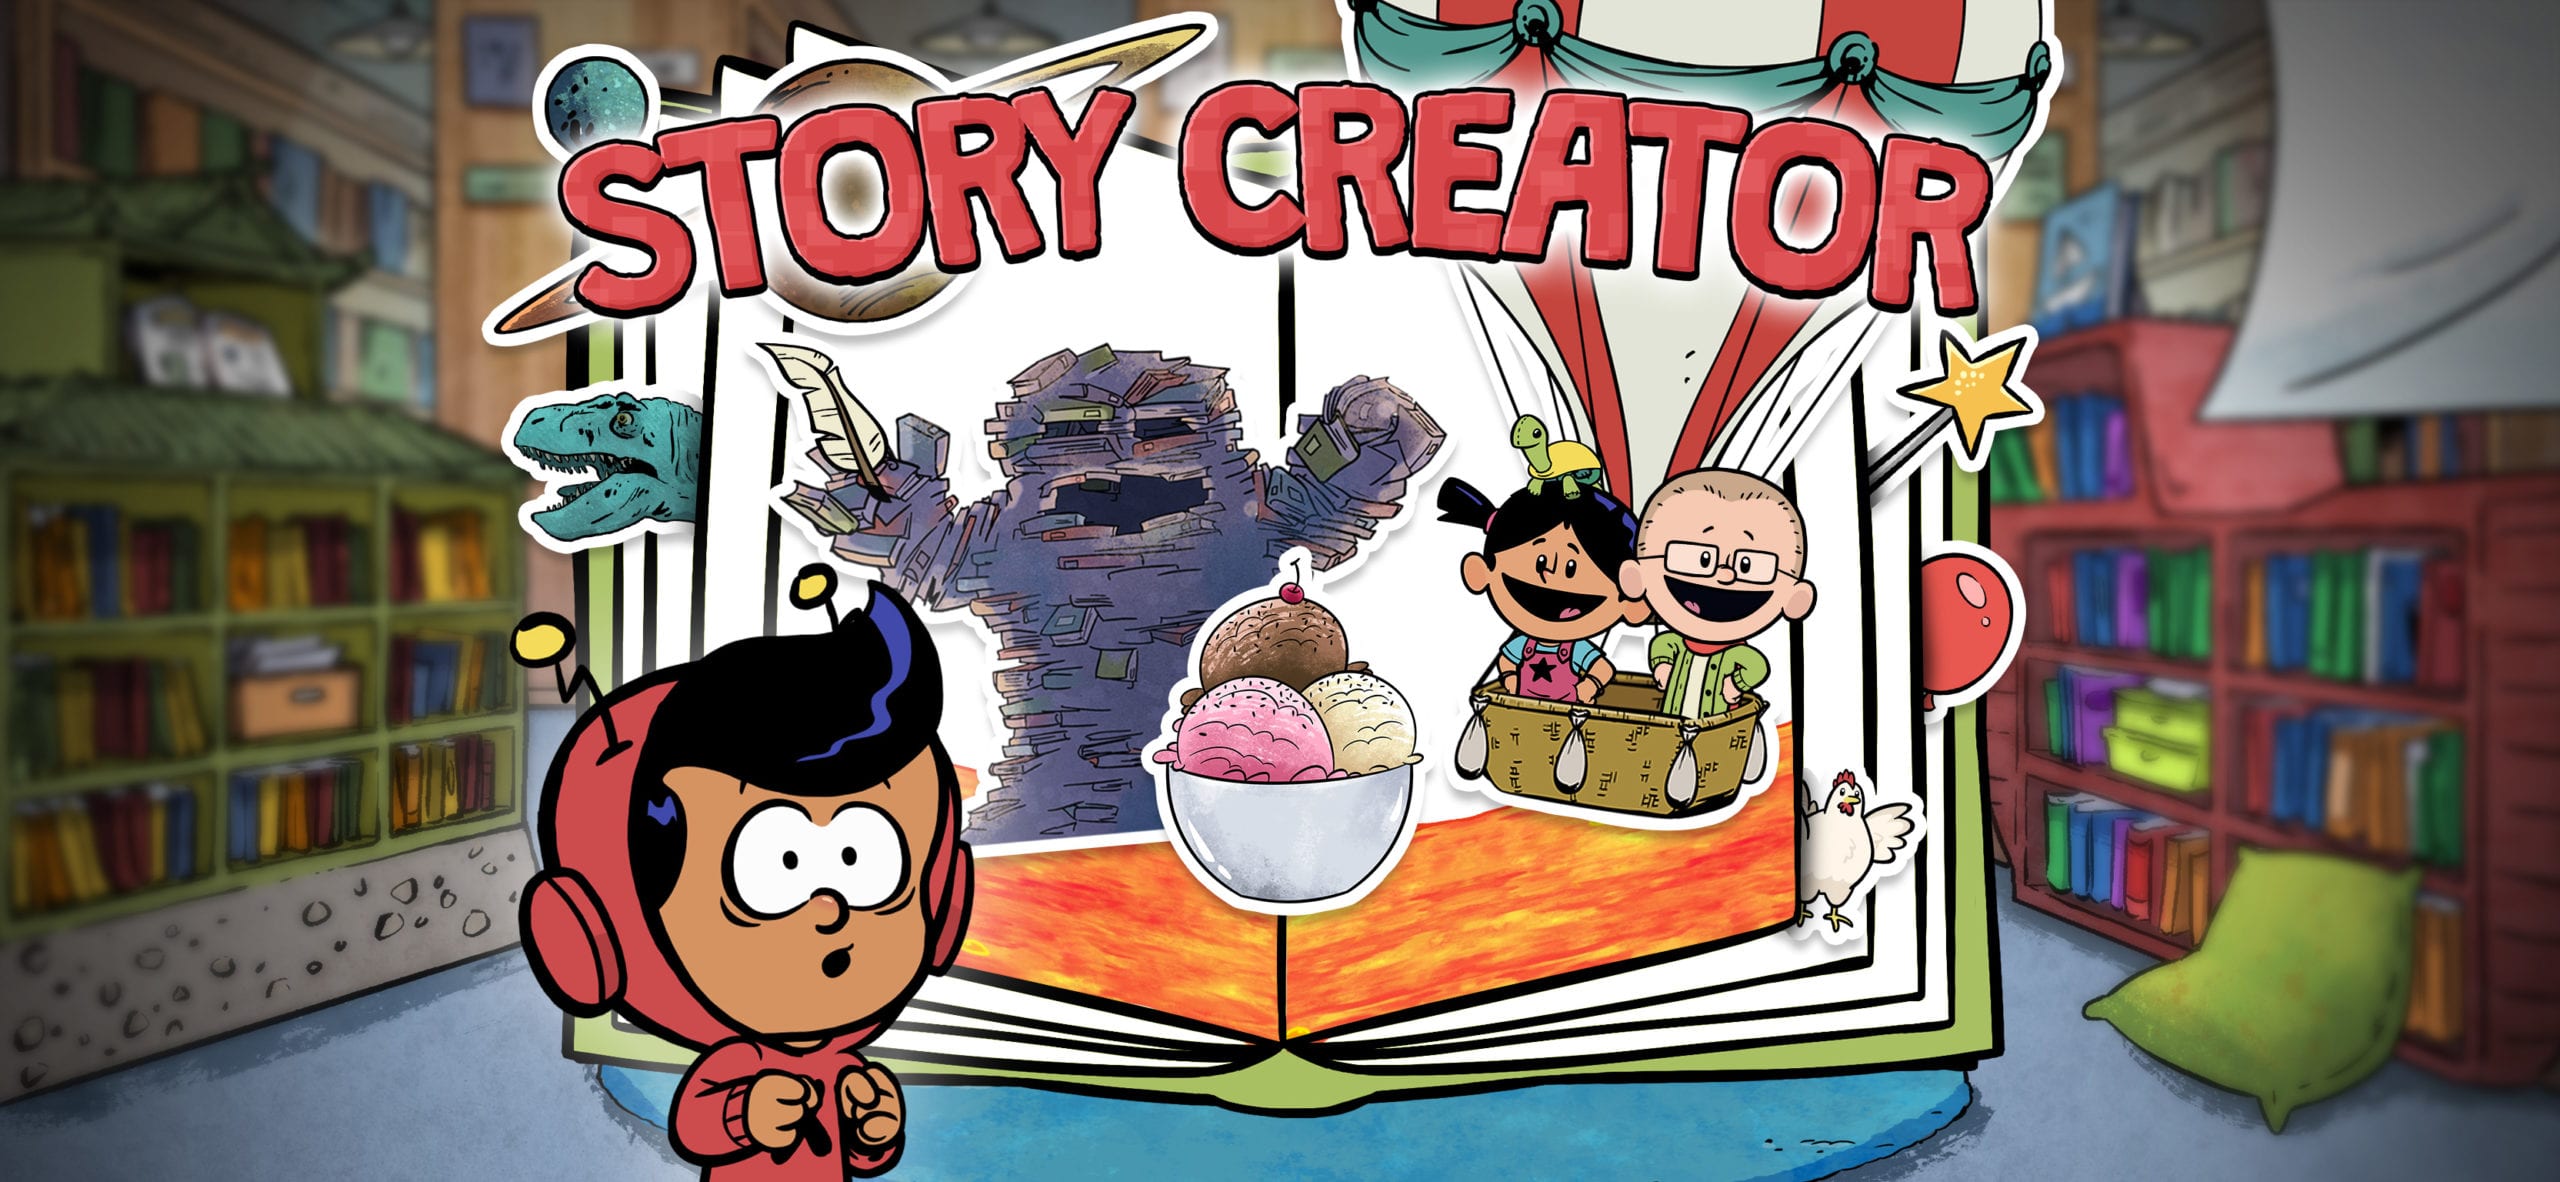 New Xavier Riddle Game - Story Creator Launches on  and PBS KIDS  App - 9 Story Media Group